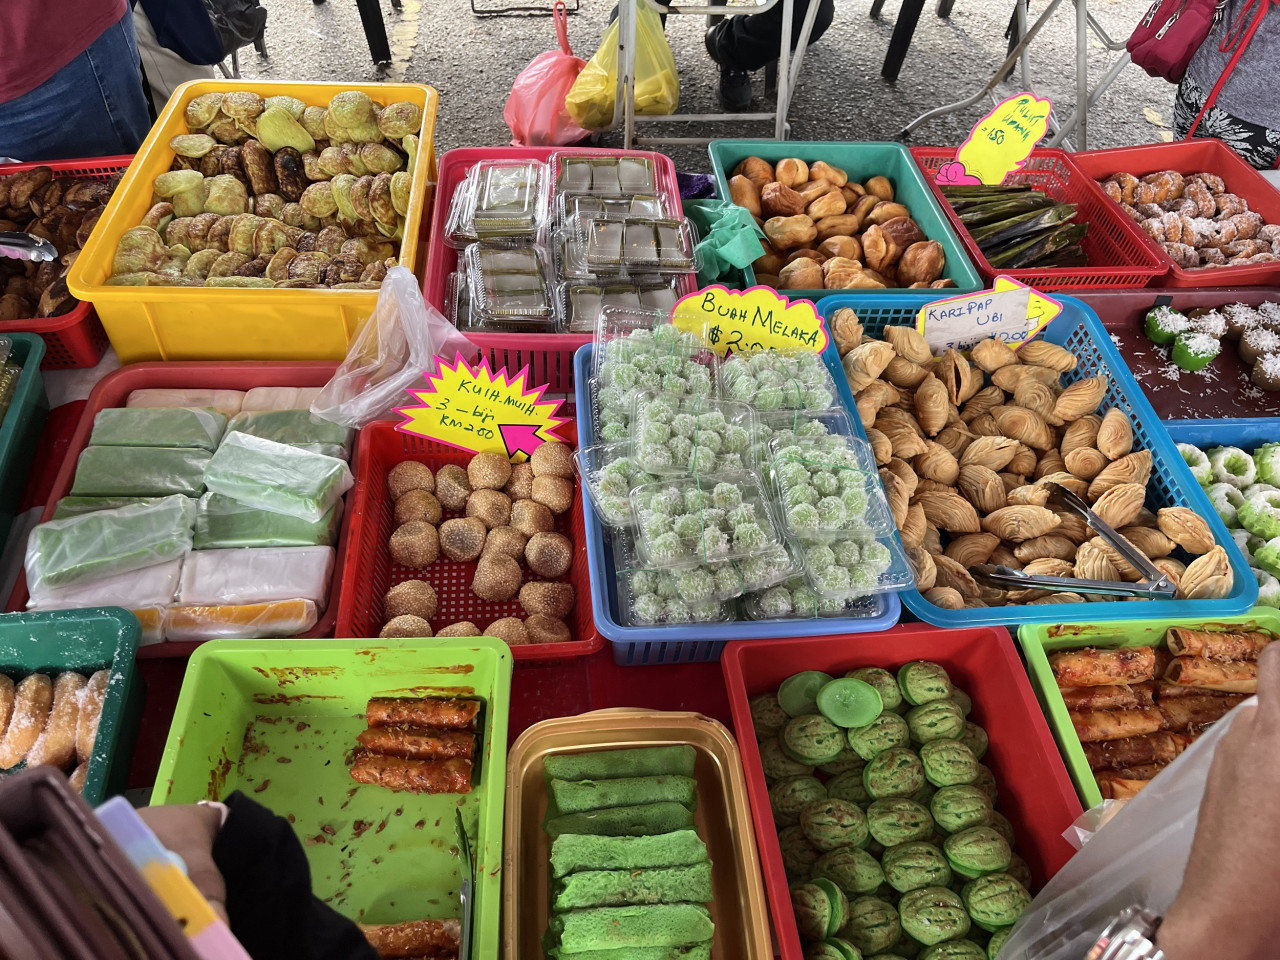 Siti Meriyam Nanyan’s stall sells more than 50 variants of desserts, ranging from onde-onde to steamed huat kuih and cream puffs. – RACHEL YEOH/The Vibes pic, April 9, 2022